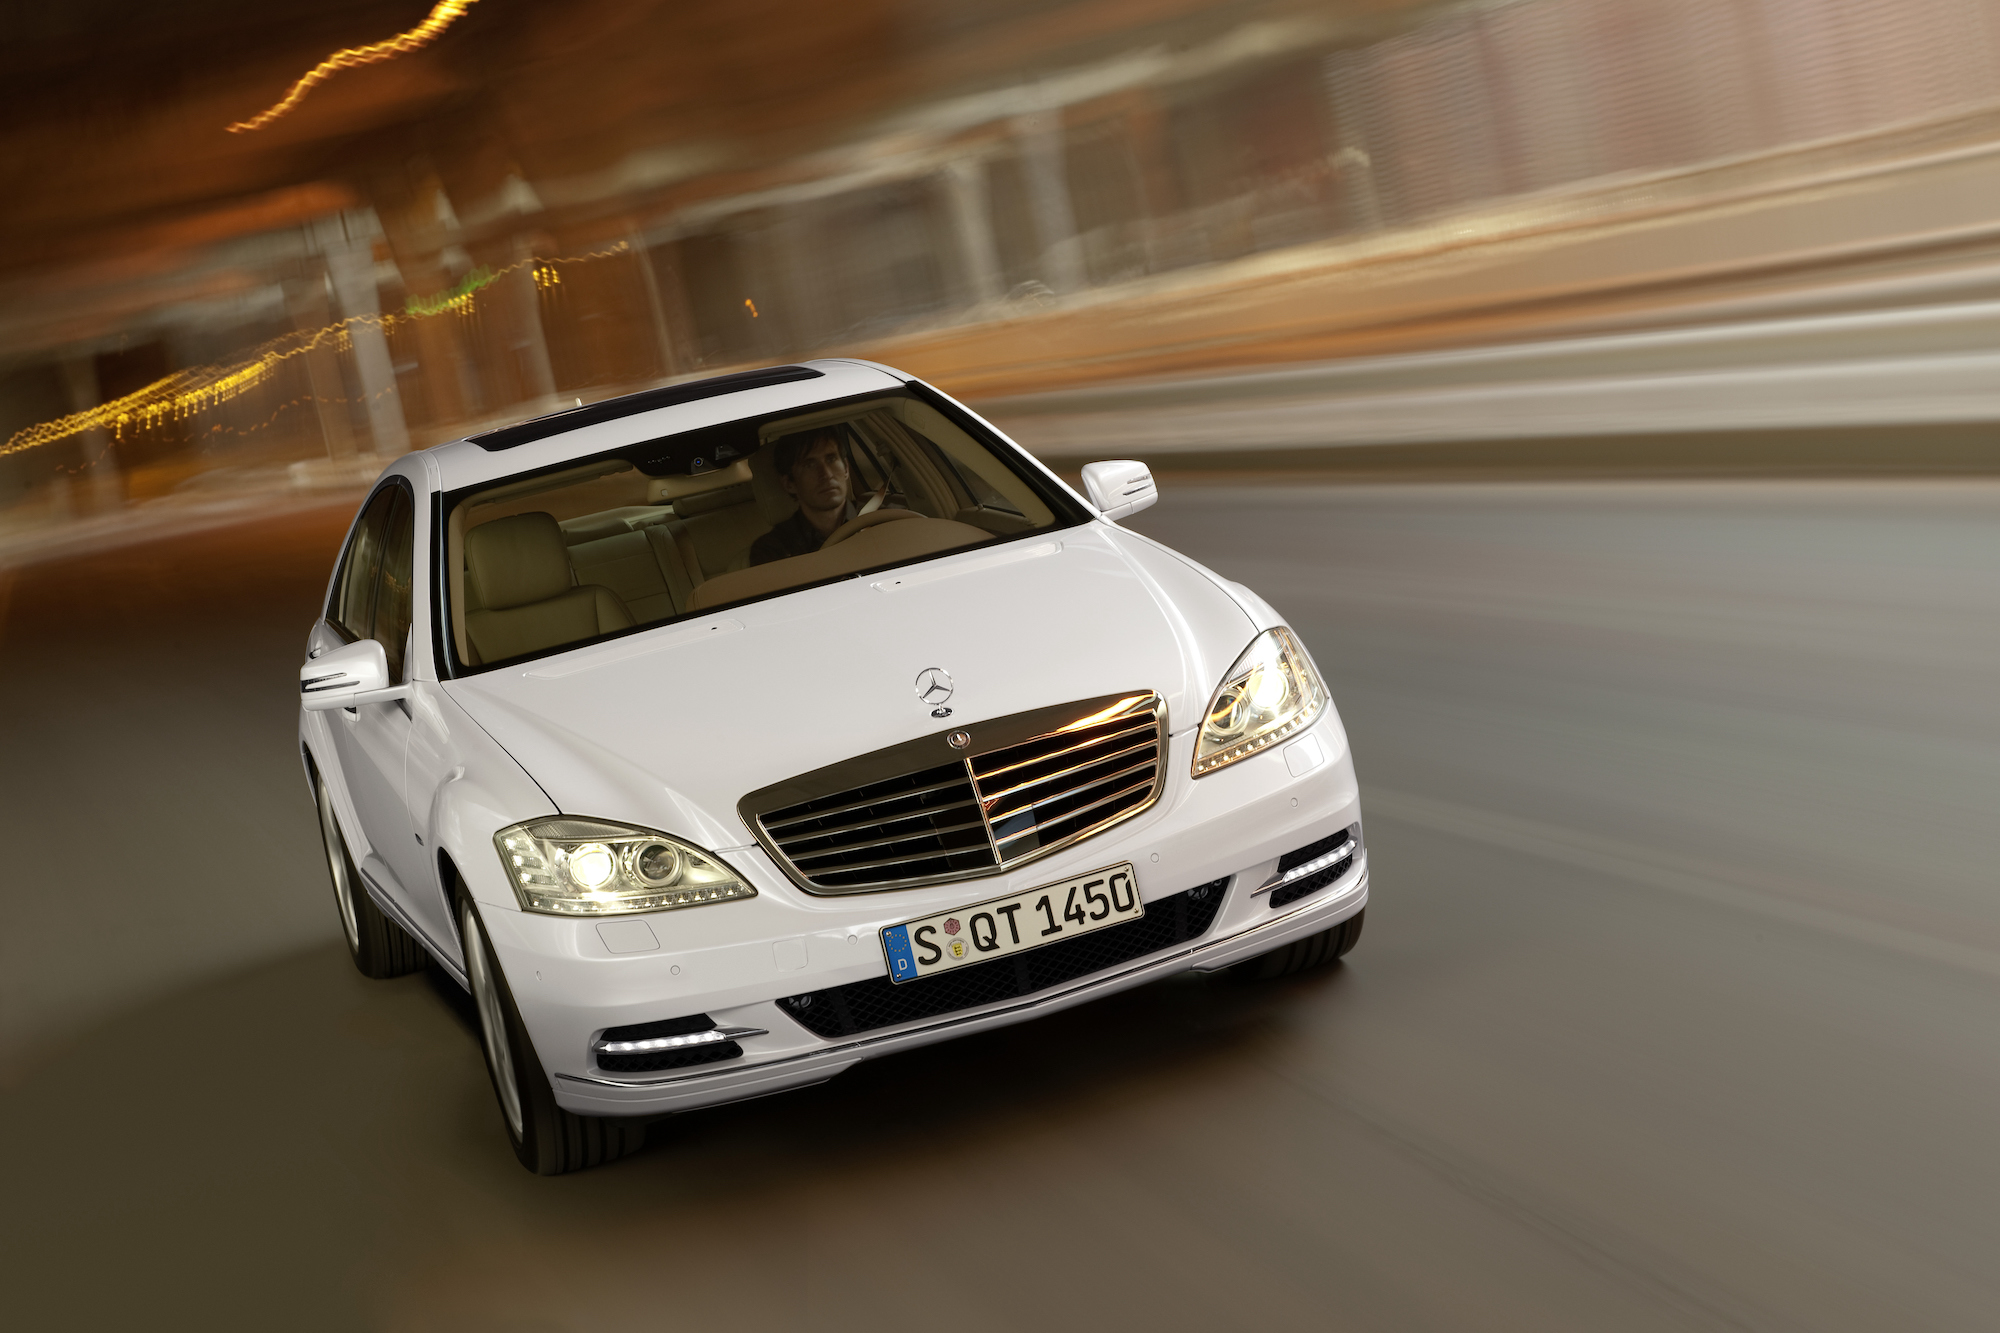 The 2009 Mercedes-Benz S-Class Stands Out 11 Years Later as a Great Used Car